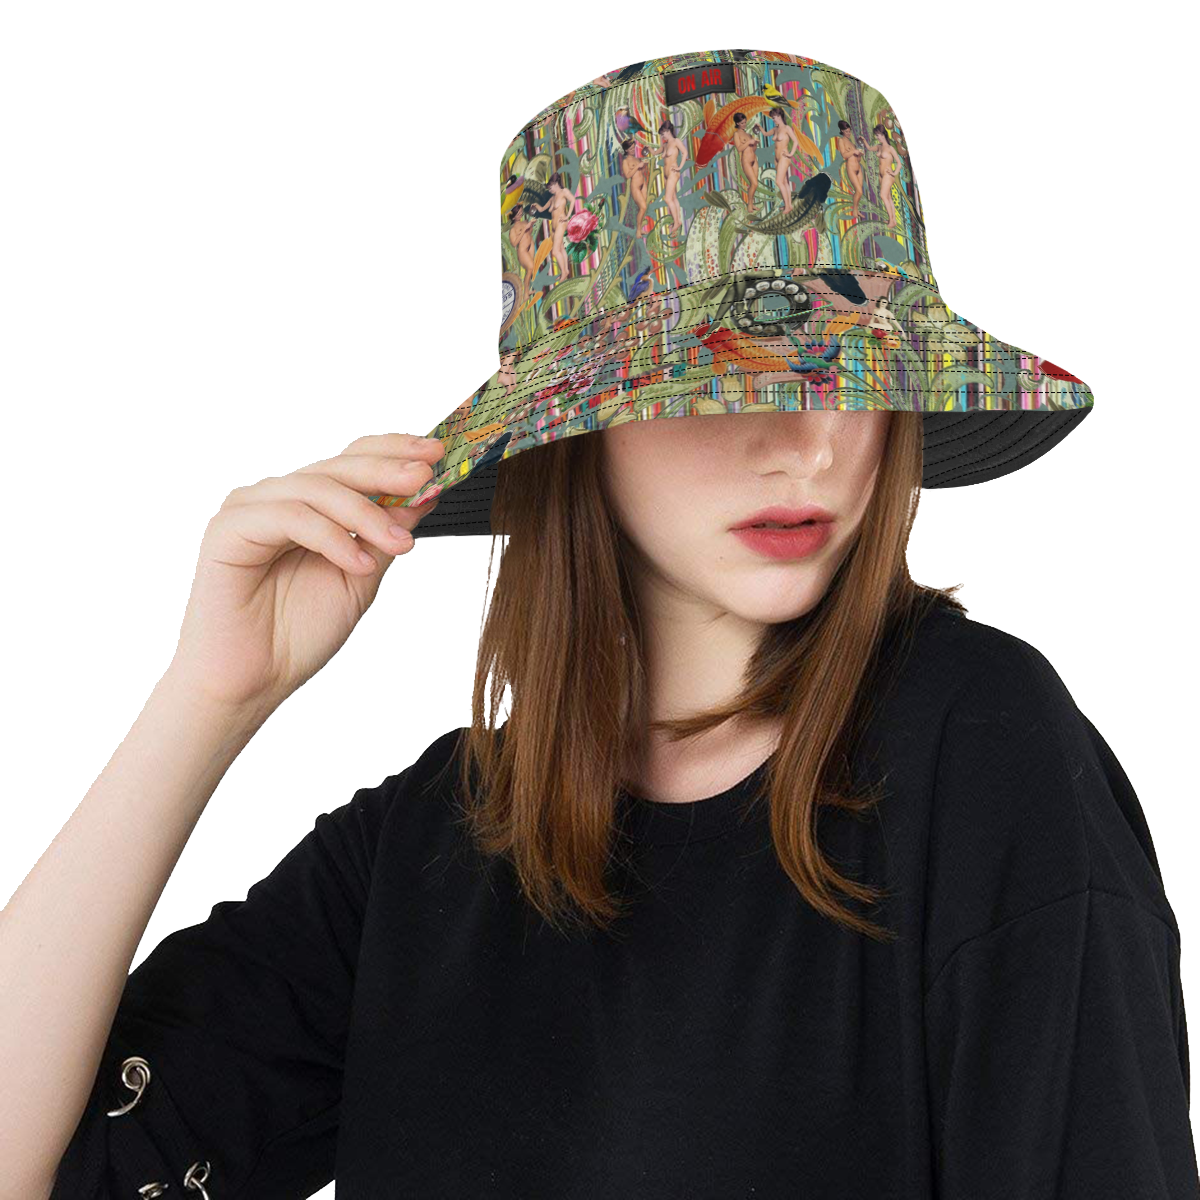 Another Relaxing Sunday All Over Print Bucket Hat